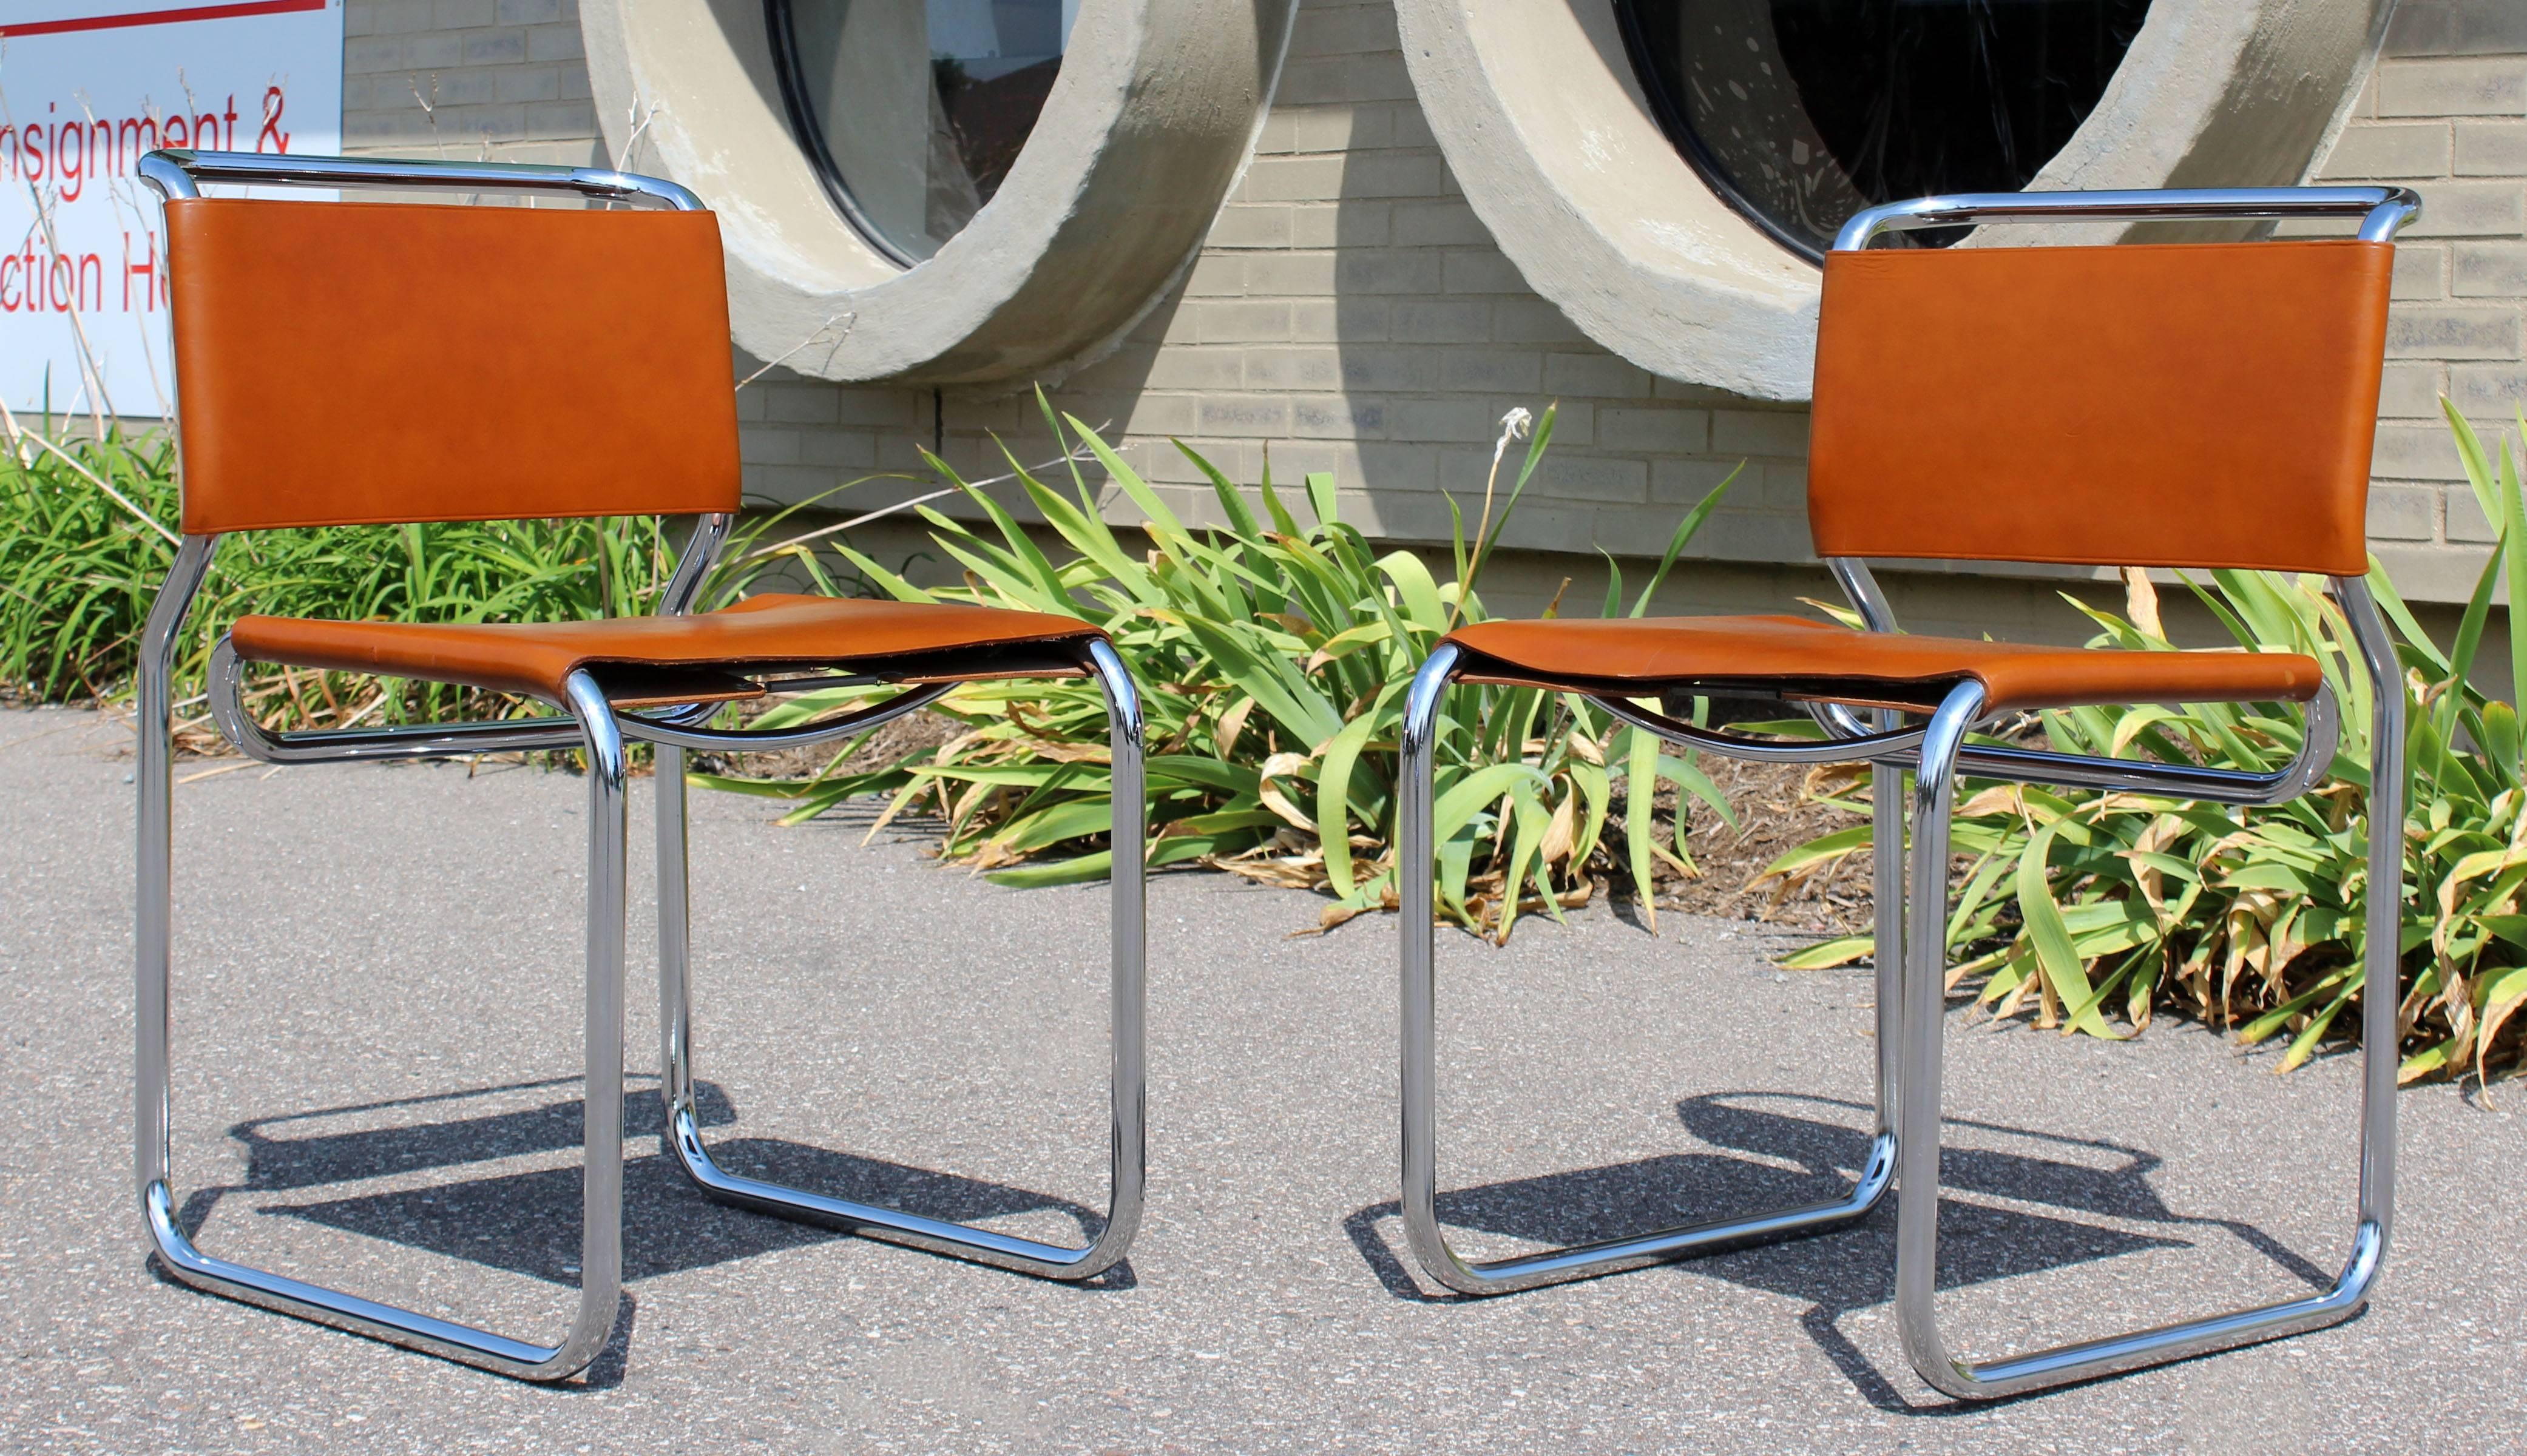 For your consideration is a fantastic set of eight side dining or office chairs, with cantilever chrome bases and orange leather upholstery, designed by Nicos Zographos in the 1960s and manufactured by GF Business Supplies in 1979. In excellent